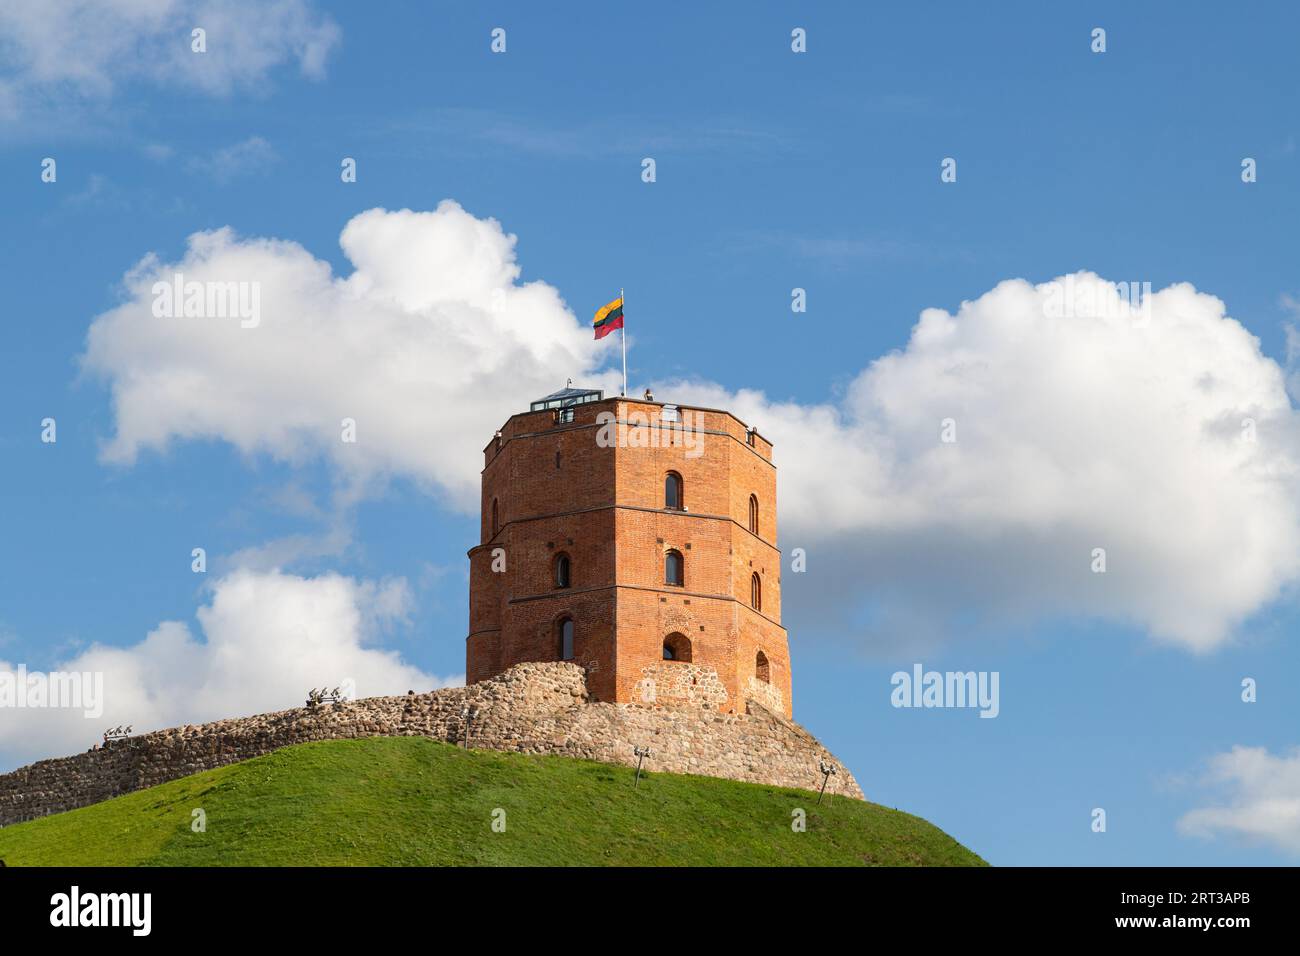 Gediminas castle tower in Vilnius Lithuania during the day. From the tower and walls you can see views of the city skyline Stock Photo